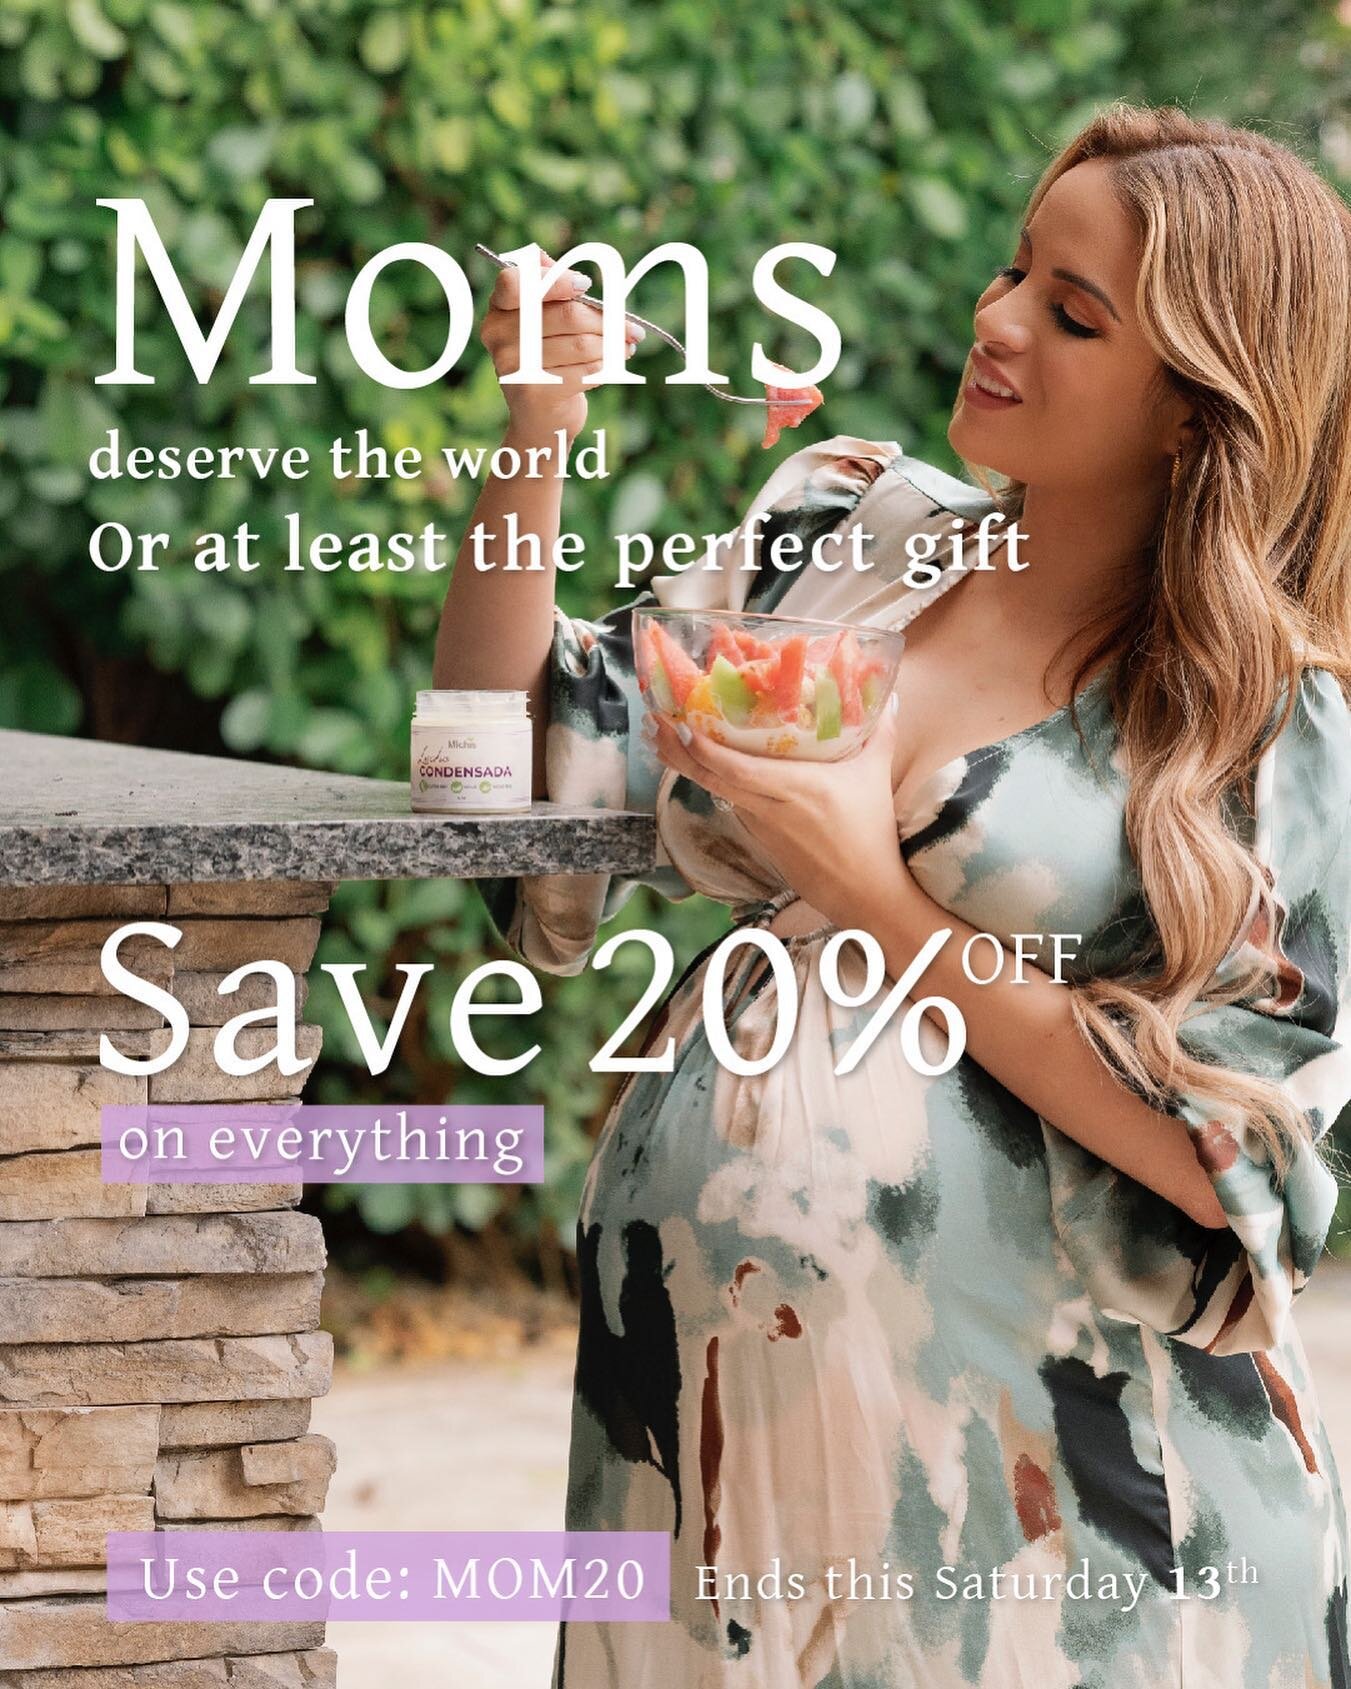 Hurry up! This ends tomorrow 🫶🏻 go shop online at michiswellness.com using the code MOM20 and save 20% OFF ON EVERYTHING. 😮🤍

#flashsale #mothersdaygift #mothersdaysale #momsday #wellnessproducts #healthylifestyle #vegan